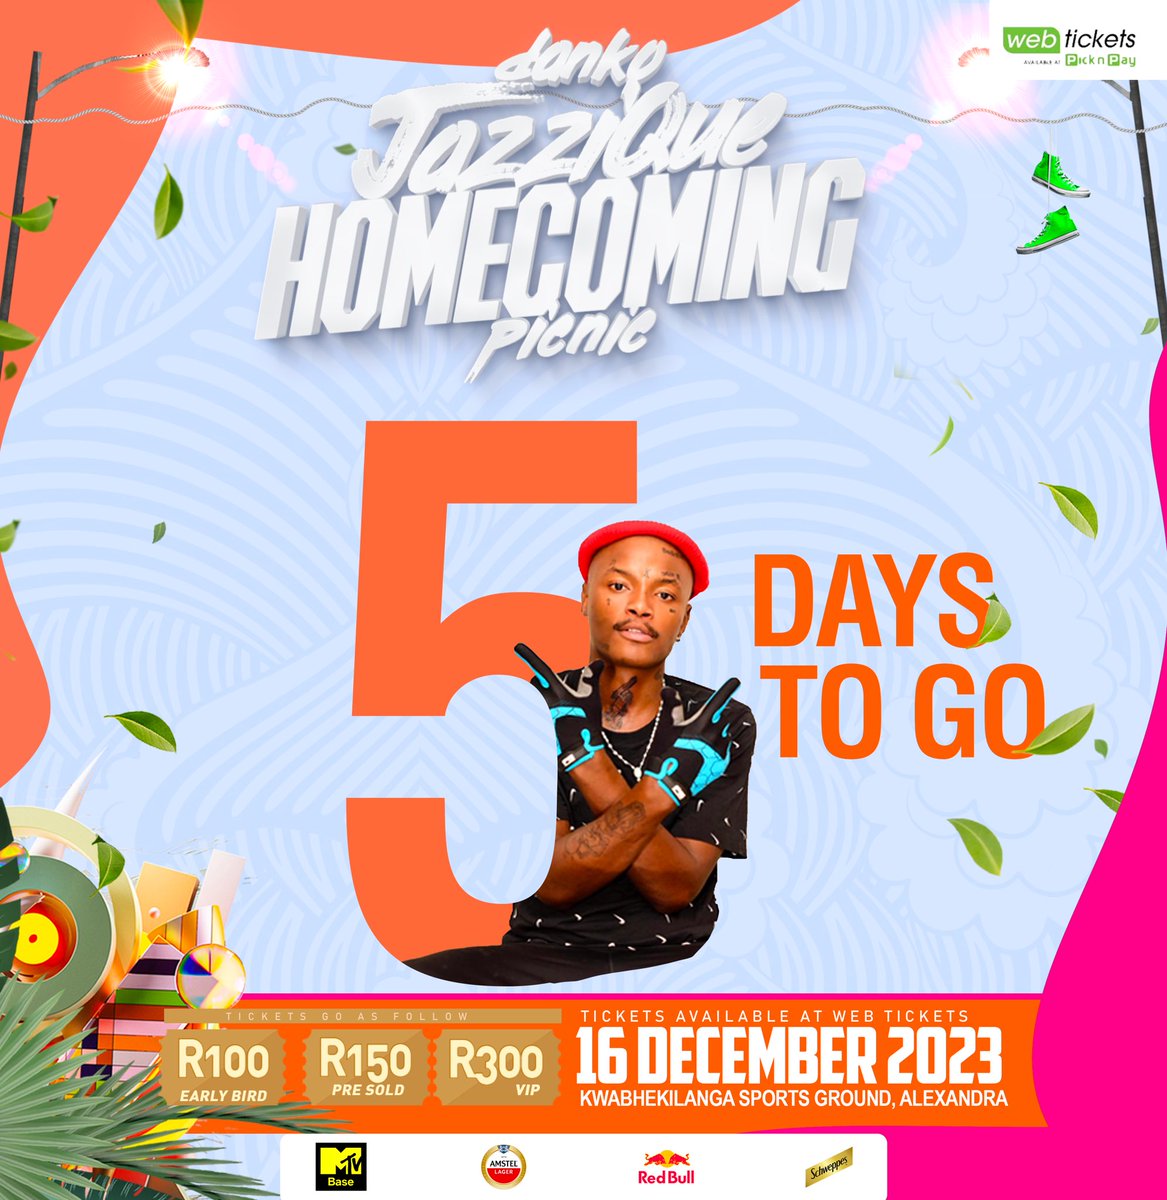 As we start counting down Tickets are still available at webtickets webtickets.co.za/v2/Event.aspx?… Dankie JazziQue